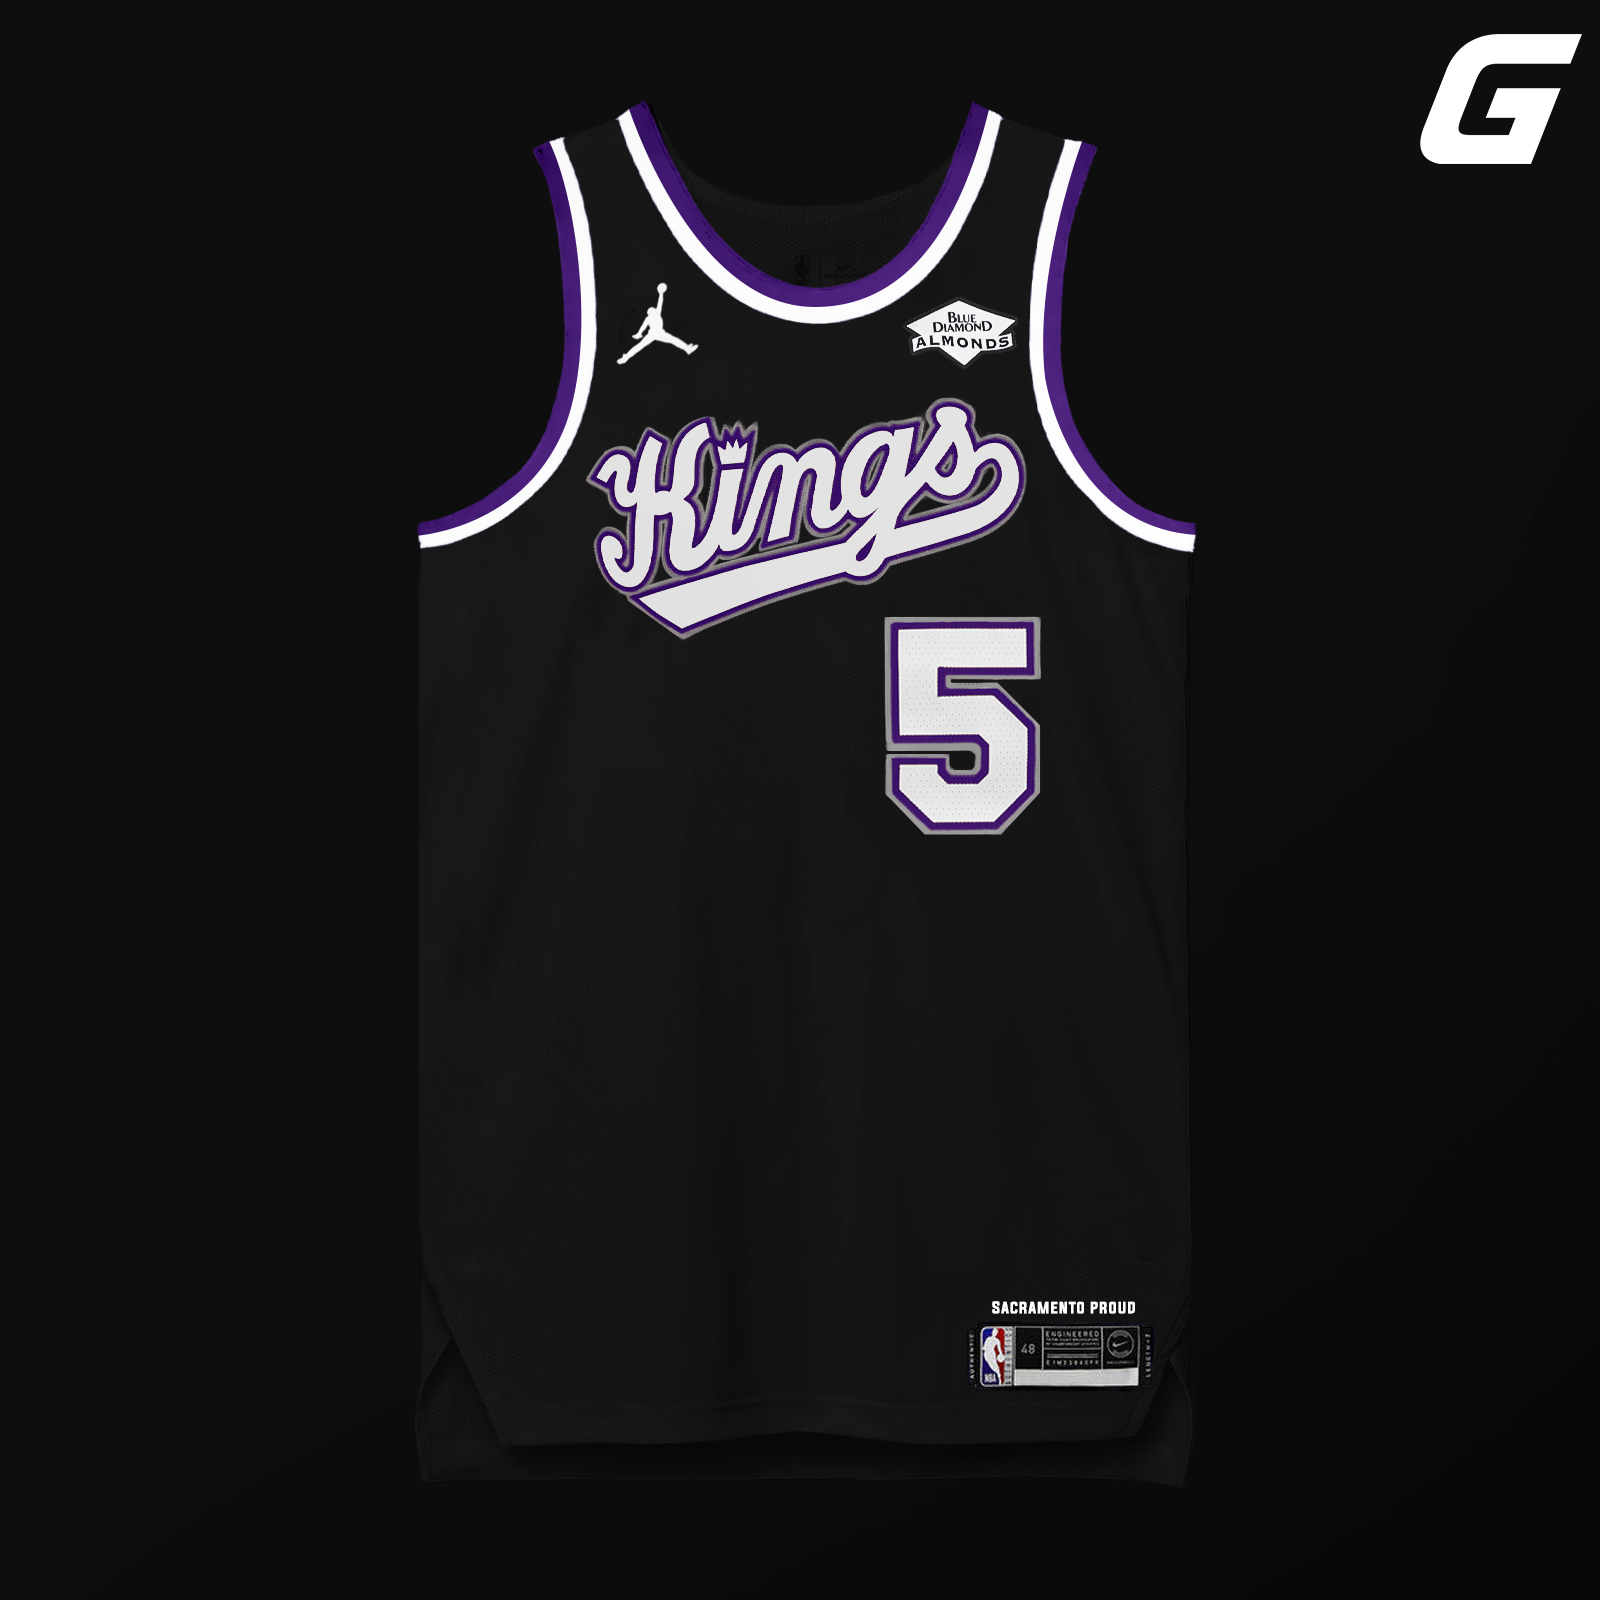 Grant Goldberg on X: picked the Kings for my newest jersey redesign relied  on some feedback from fans and combined stuff from their past looks to come  up with these  /